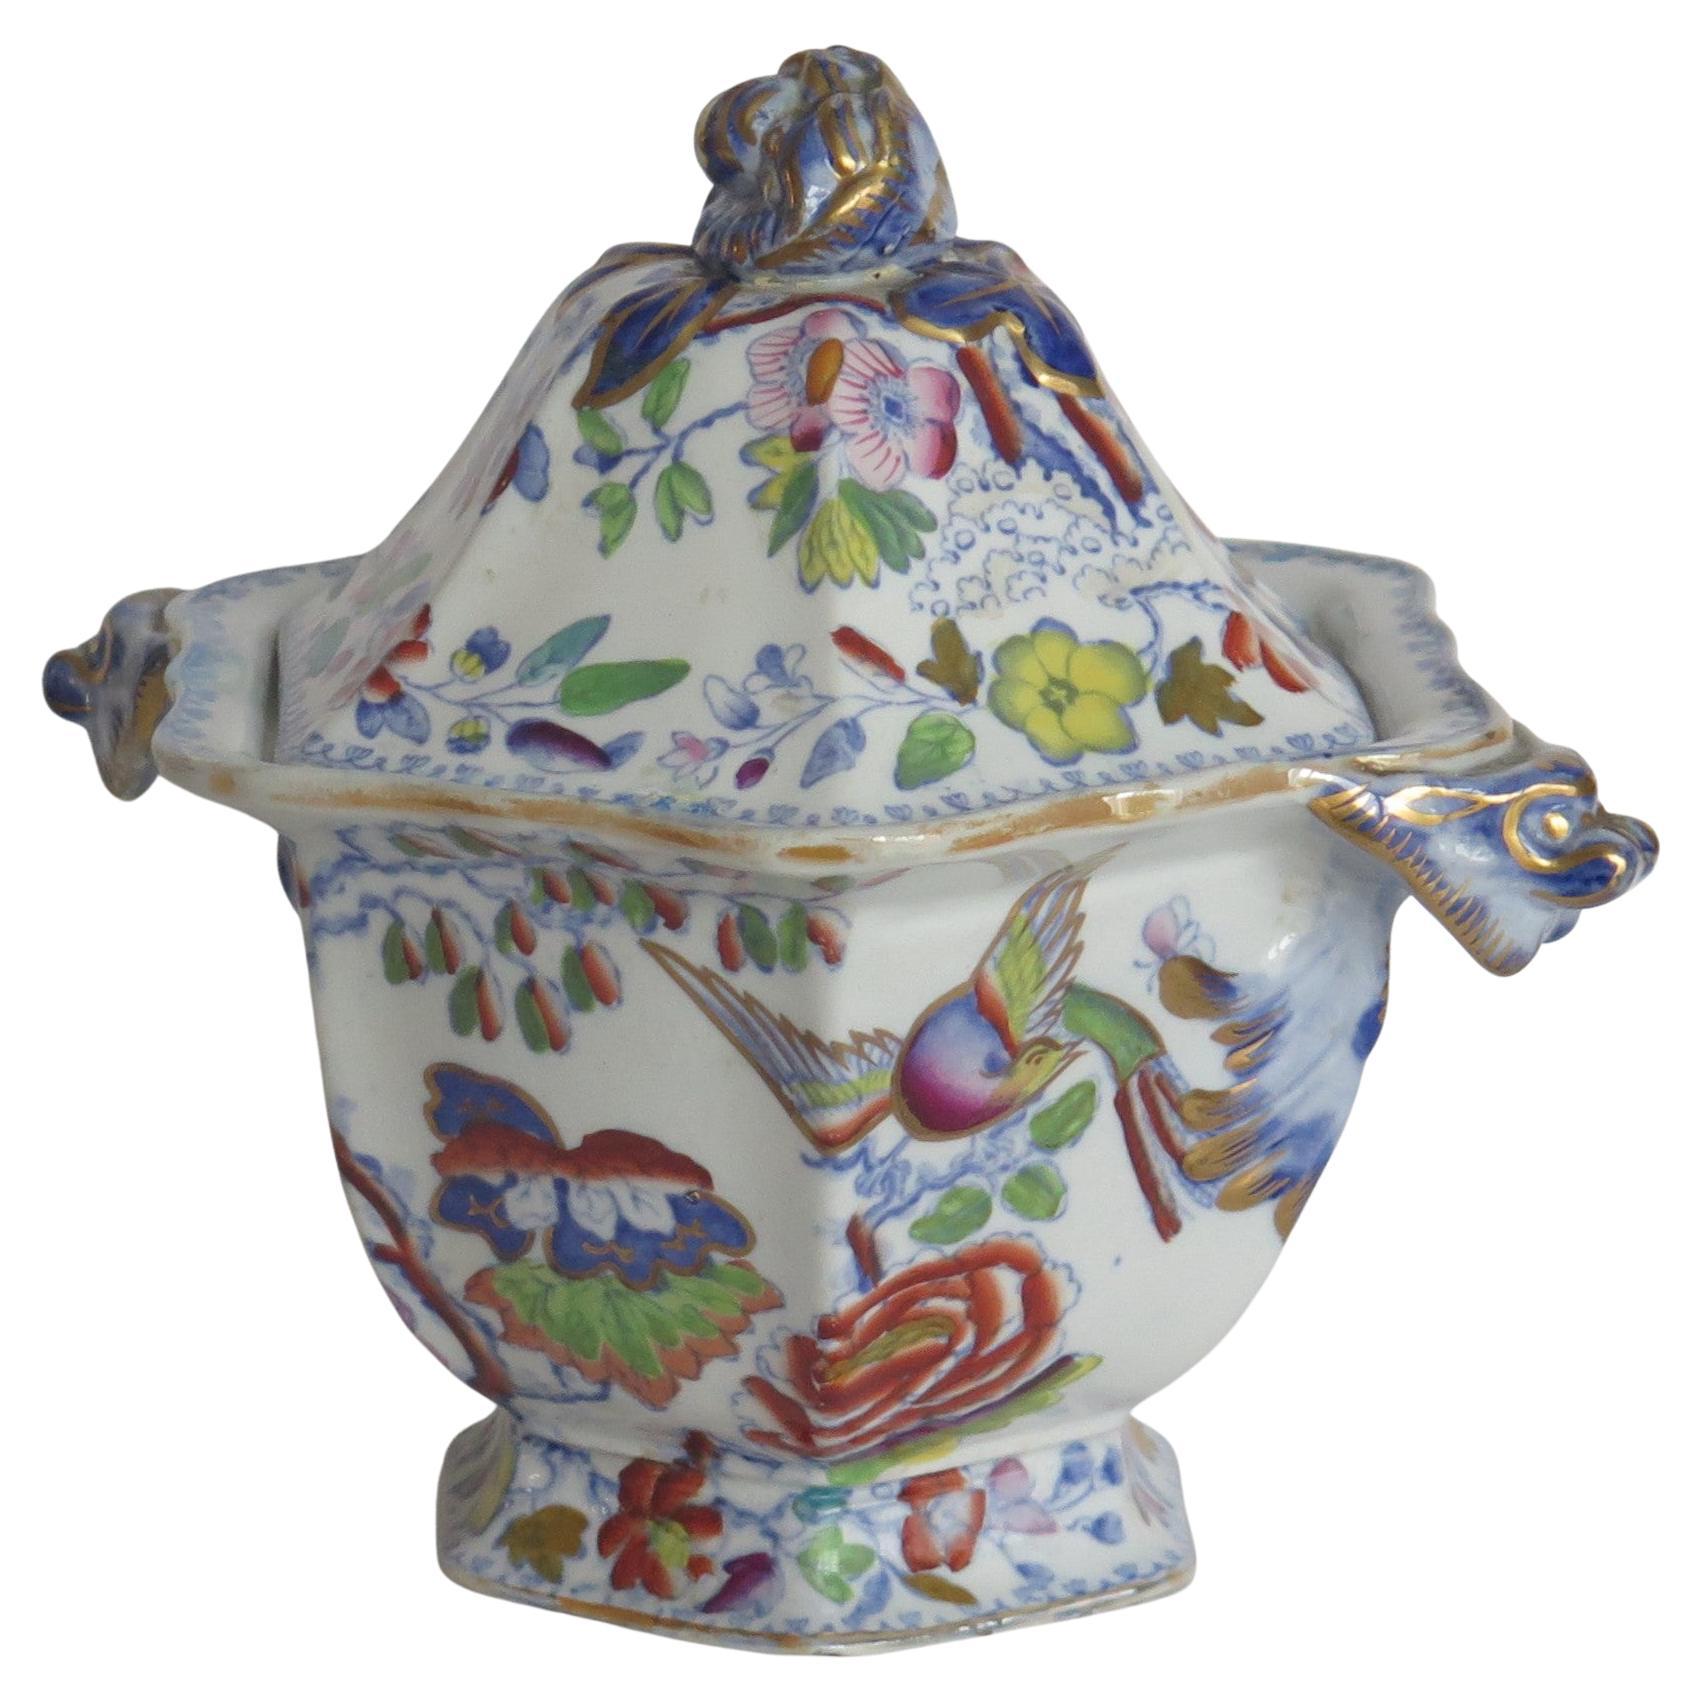 This is an ironstone twin handled Sauce Tureen and Lid, hand enameled & gilded in the Flying Bird pattern, made by Mason's Ironstone of Lane Delph, Staffordshire, England, during the 19th century, circa 1860.

This hexagonal piece is well potted